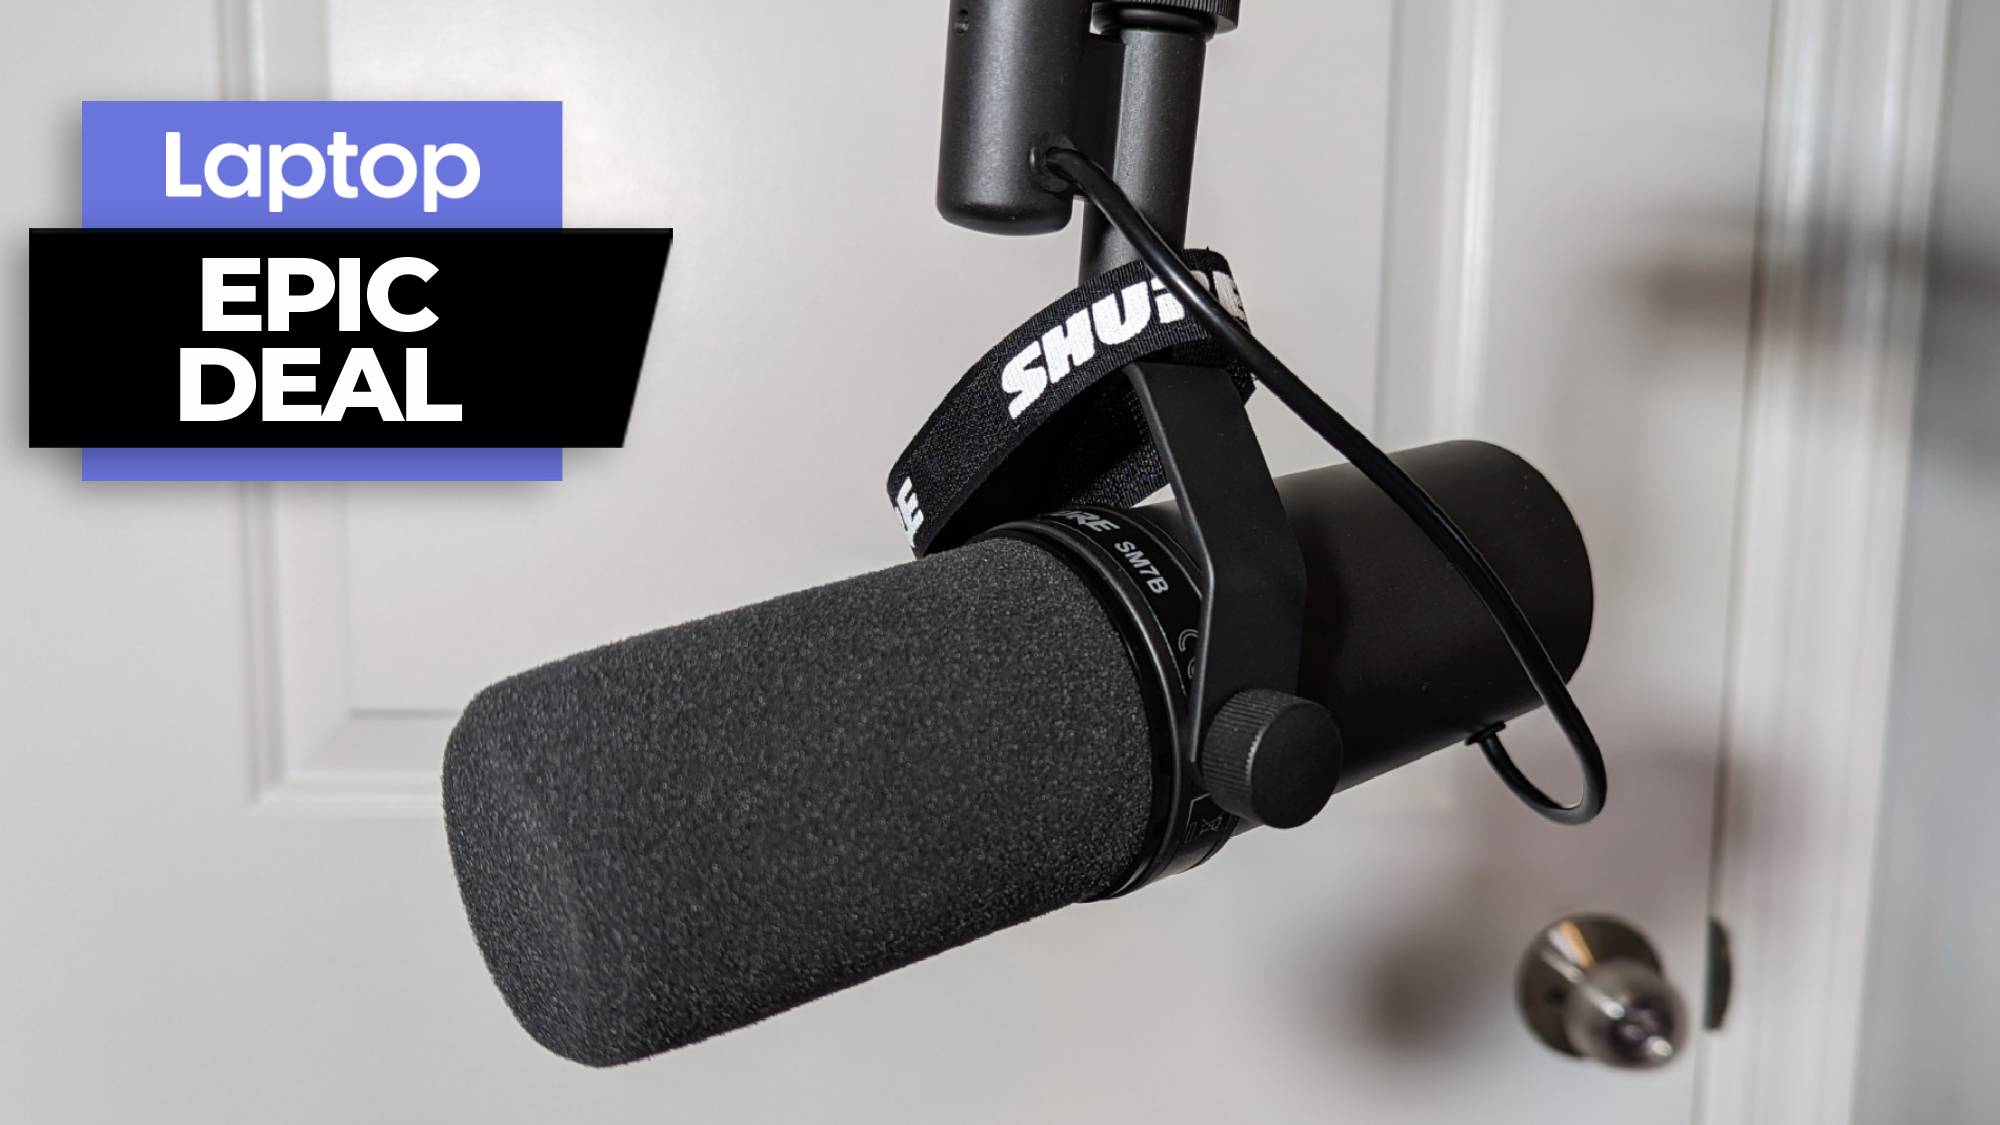 The excellent Shure SM7B XLR microphone drops to $359 — lowest price of the year